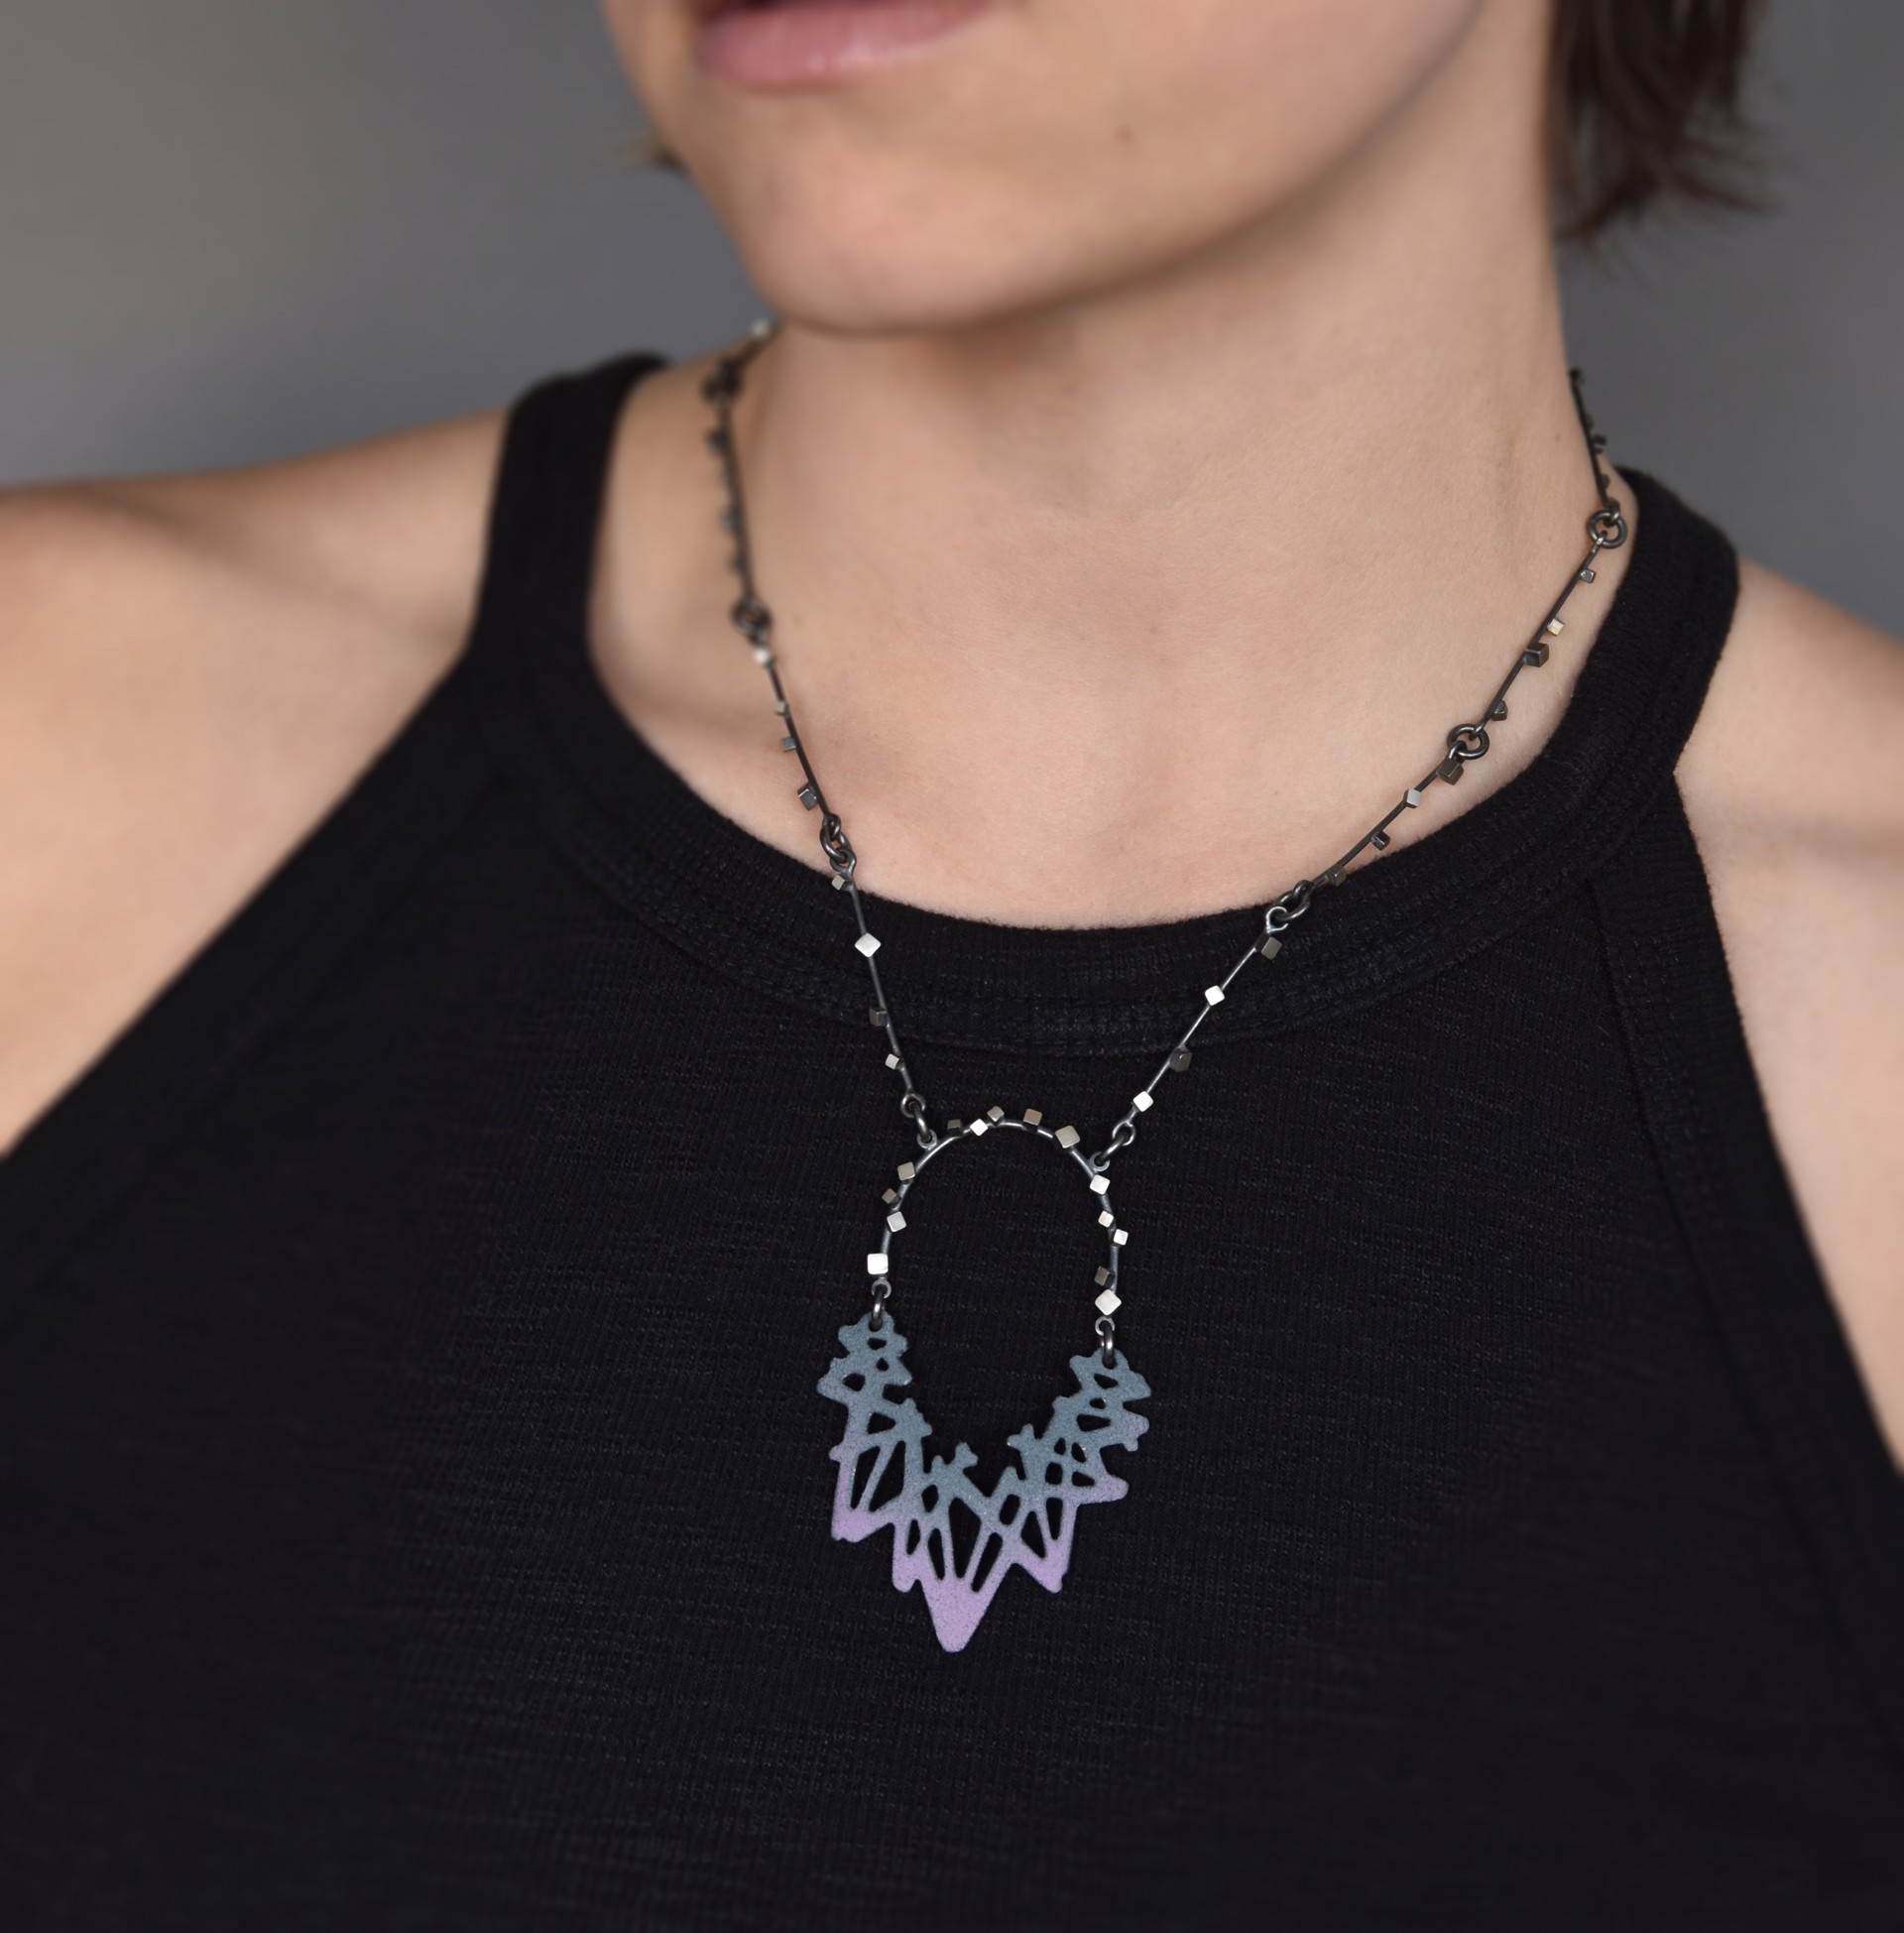 Cube Crown Necklace by Joanna Nealey